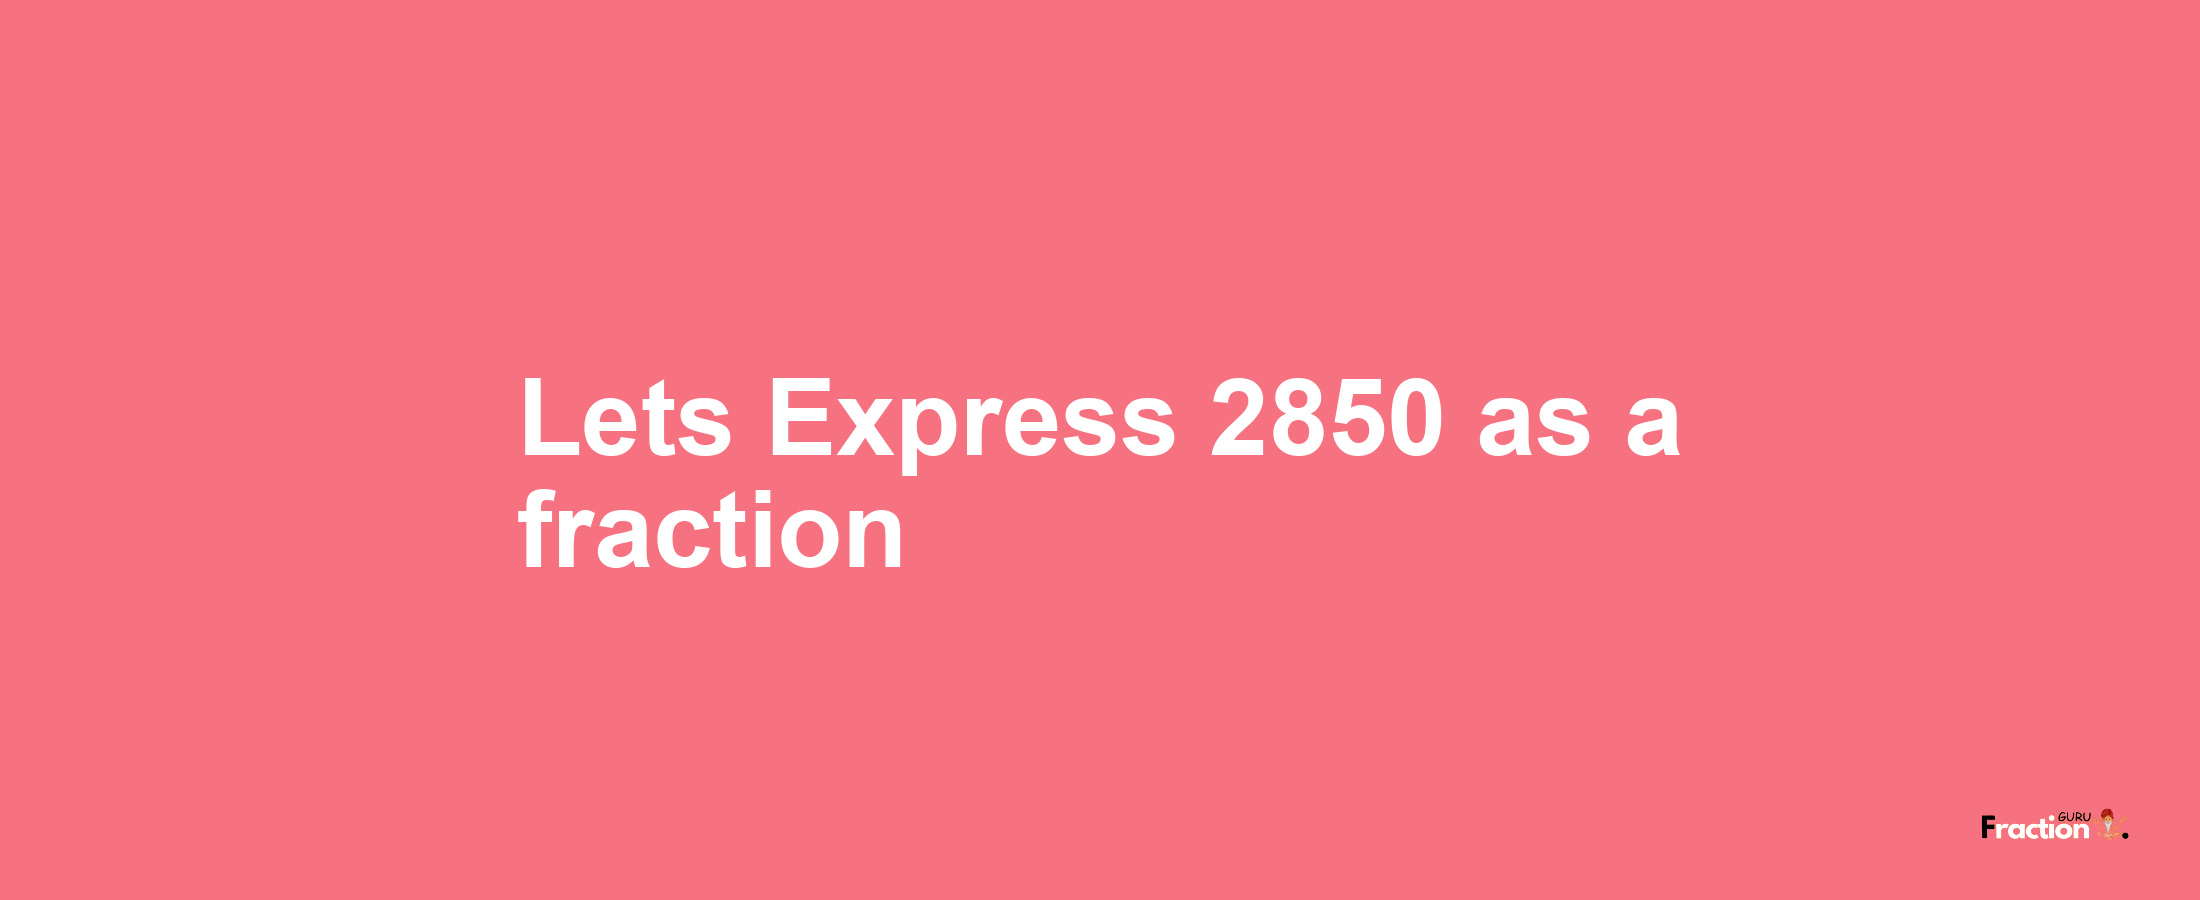 Lets Express 2850 as afraction